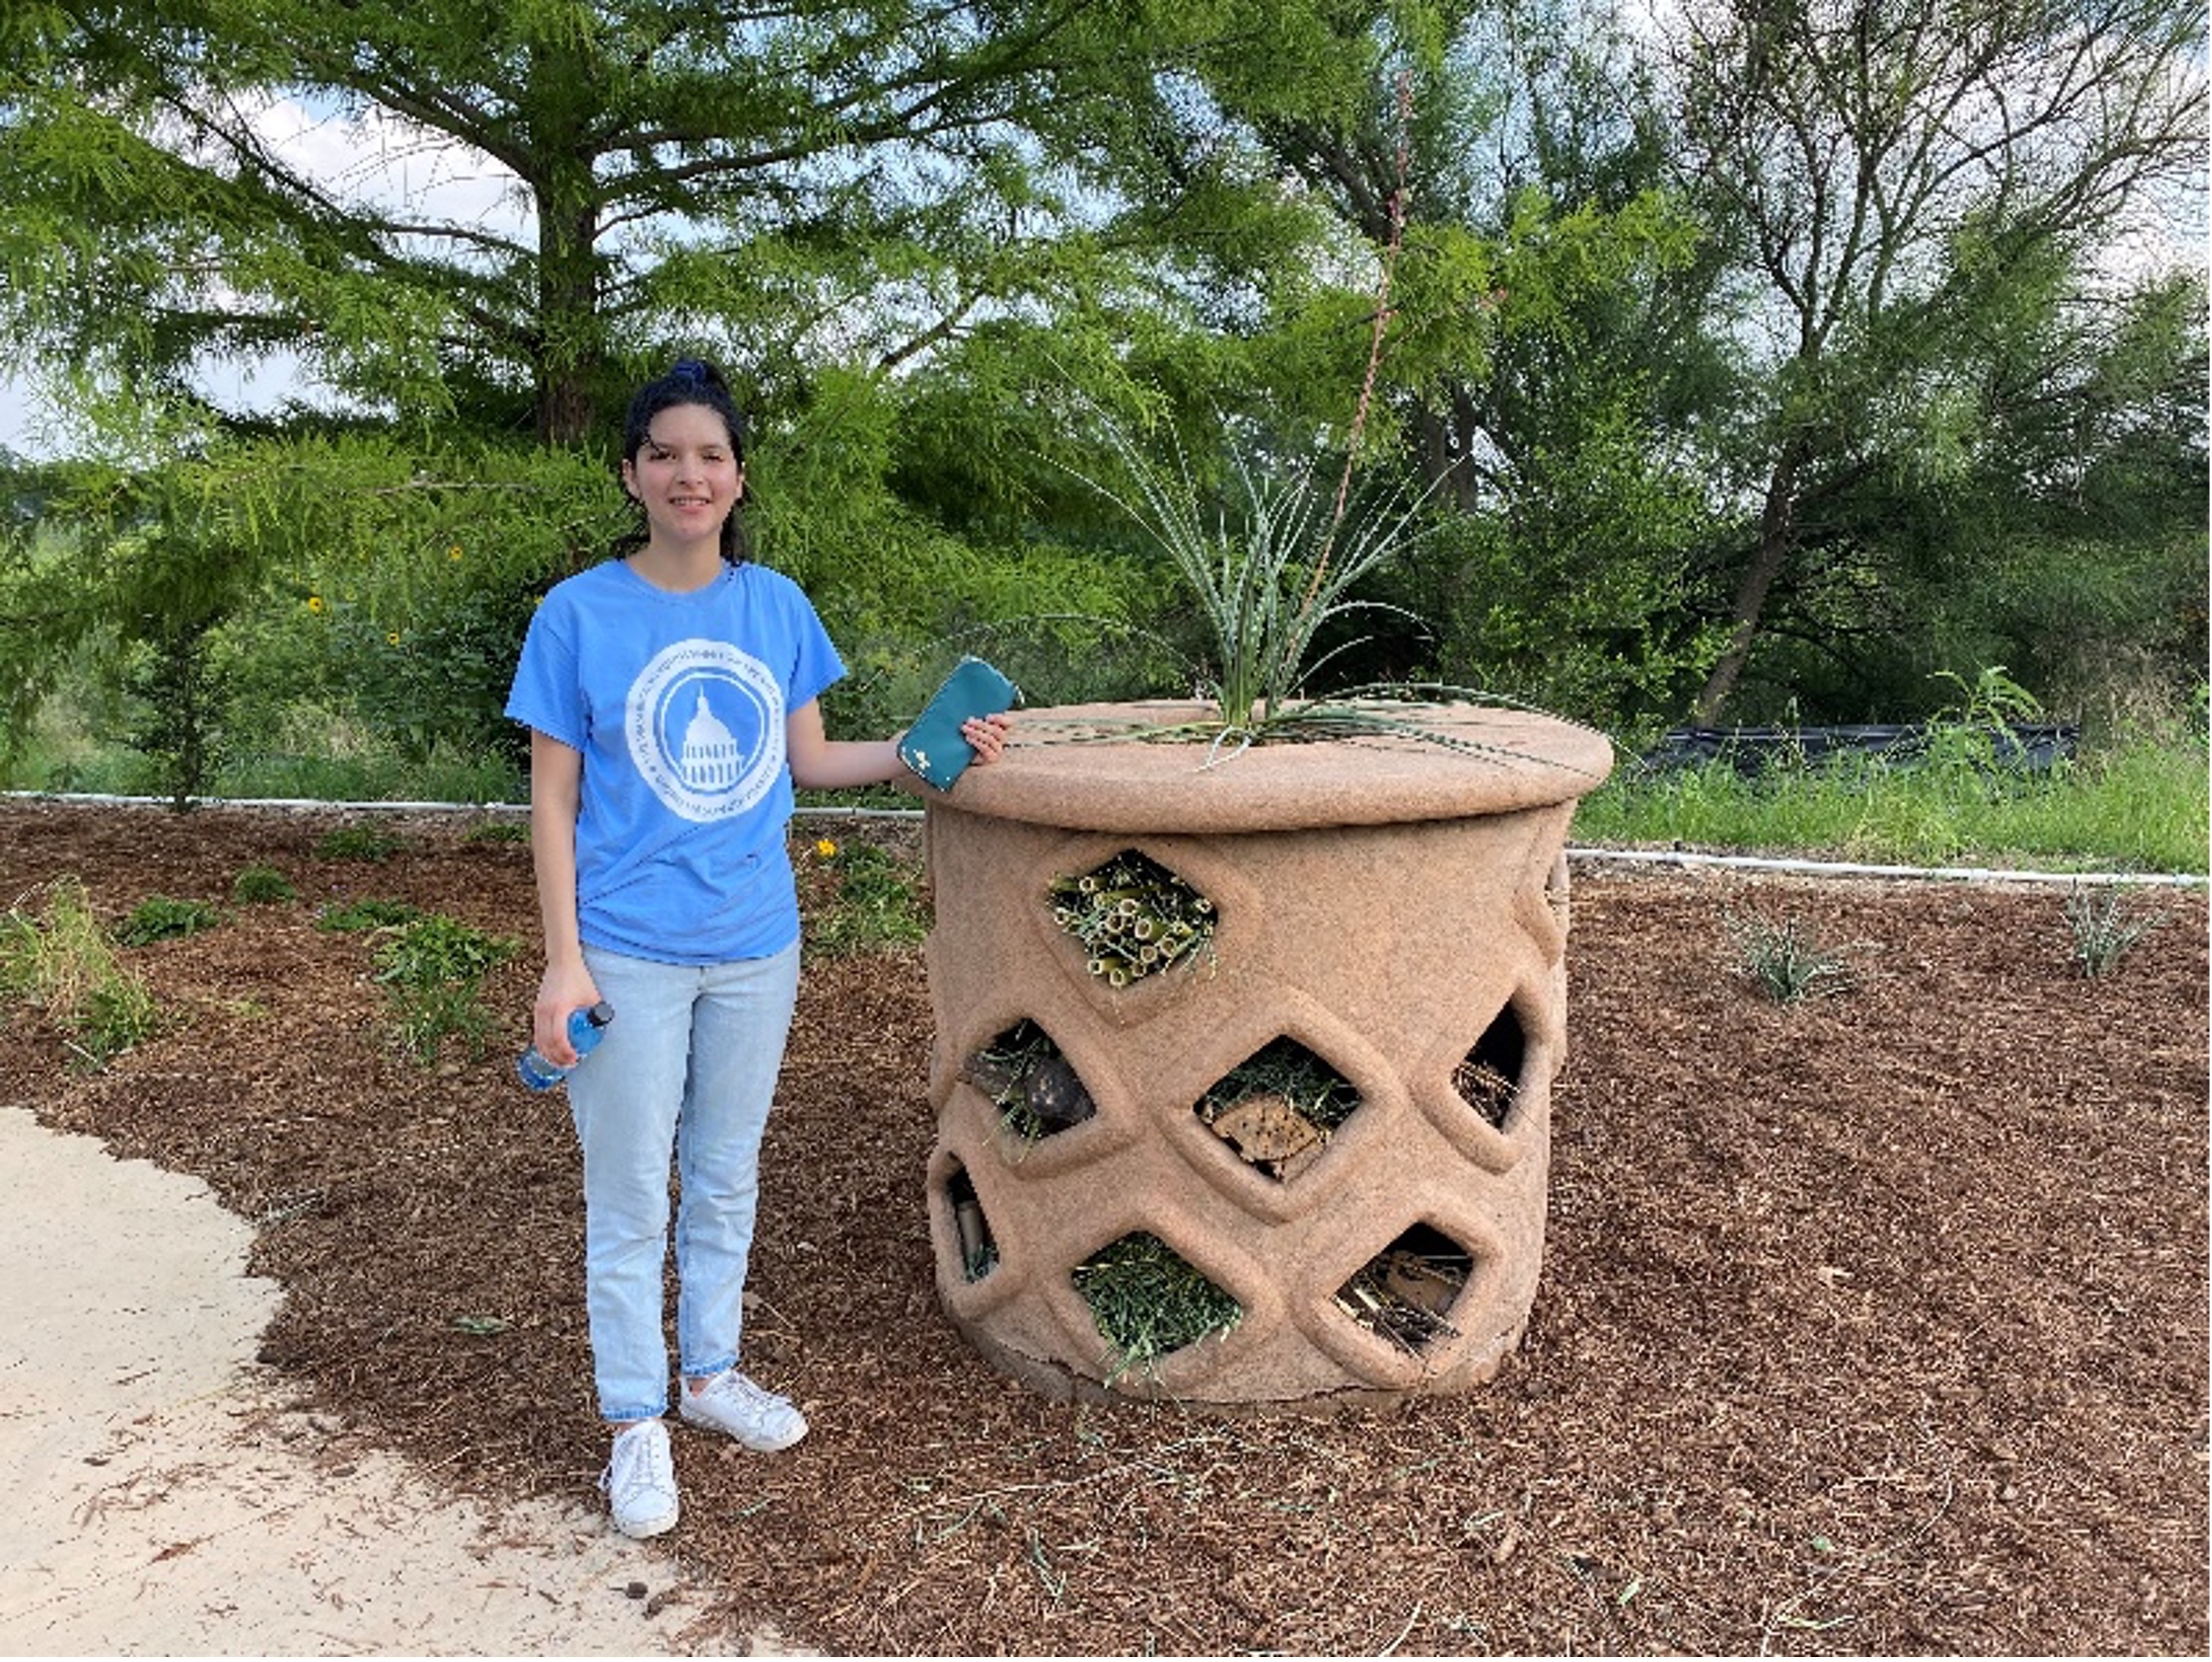 Student intern Paloma Jimenez with the insect hotel. 